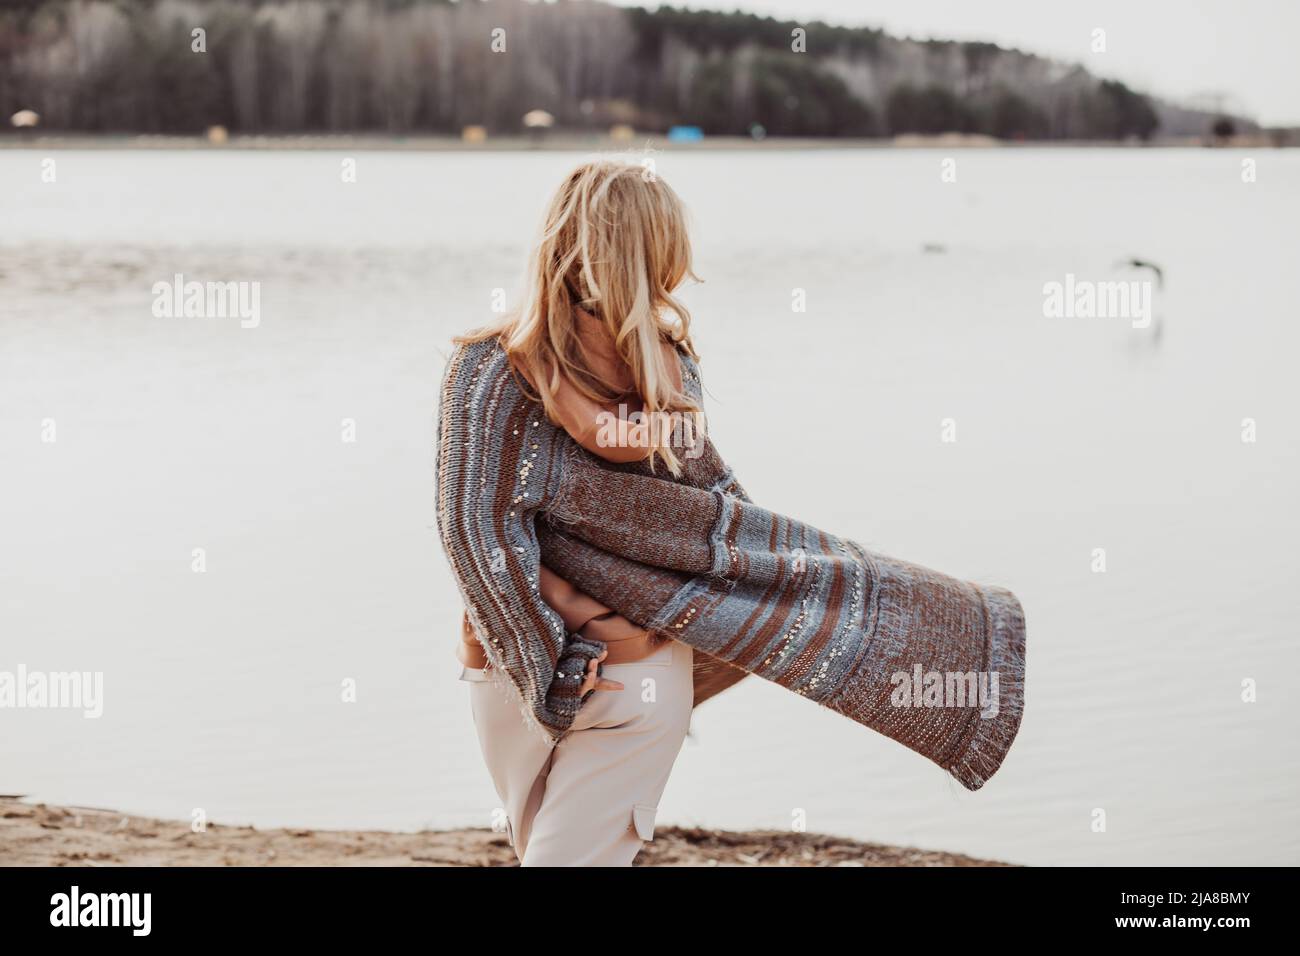 Portrait of woman with long wavy fair hair wearing brown woolen cardigan, beige trousers, going away from sandy beach. Stock Photo